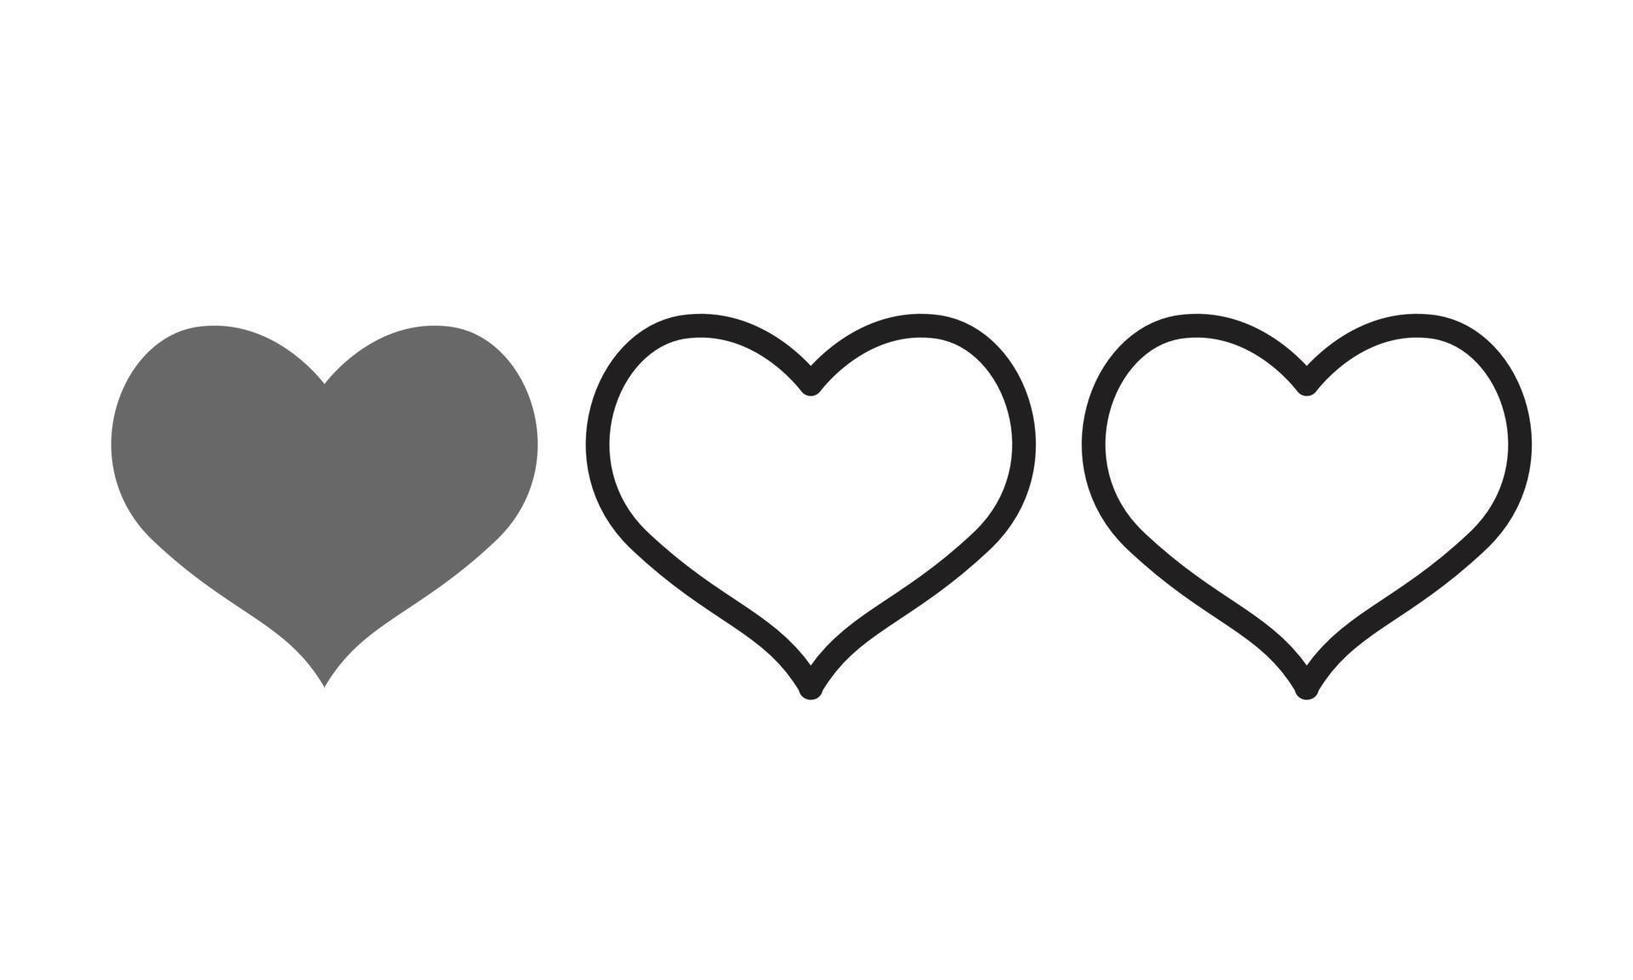 Collection of heart illustrations set vector